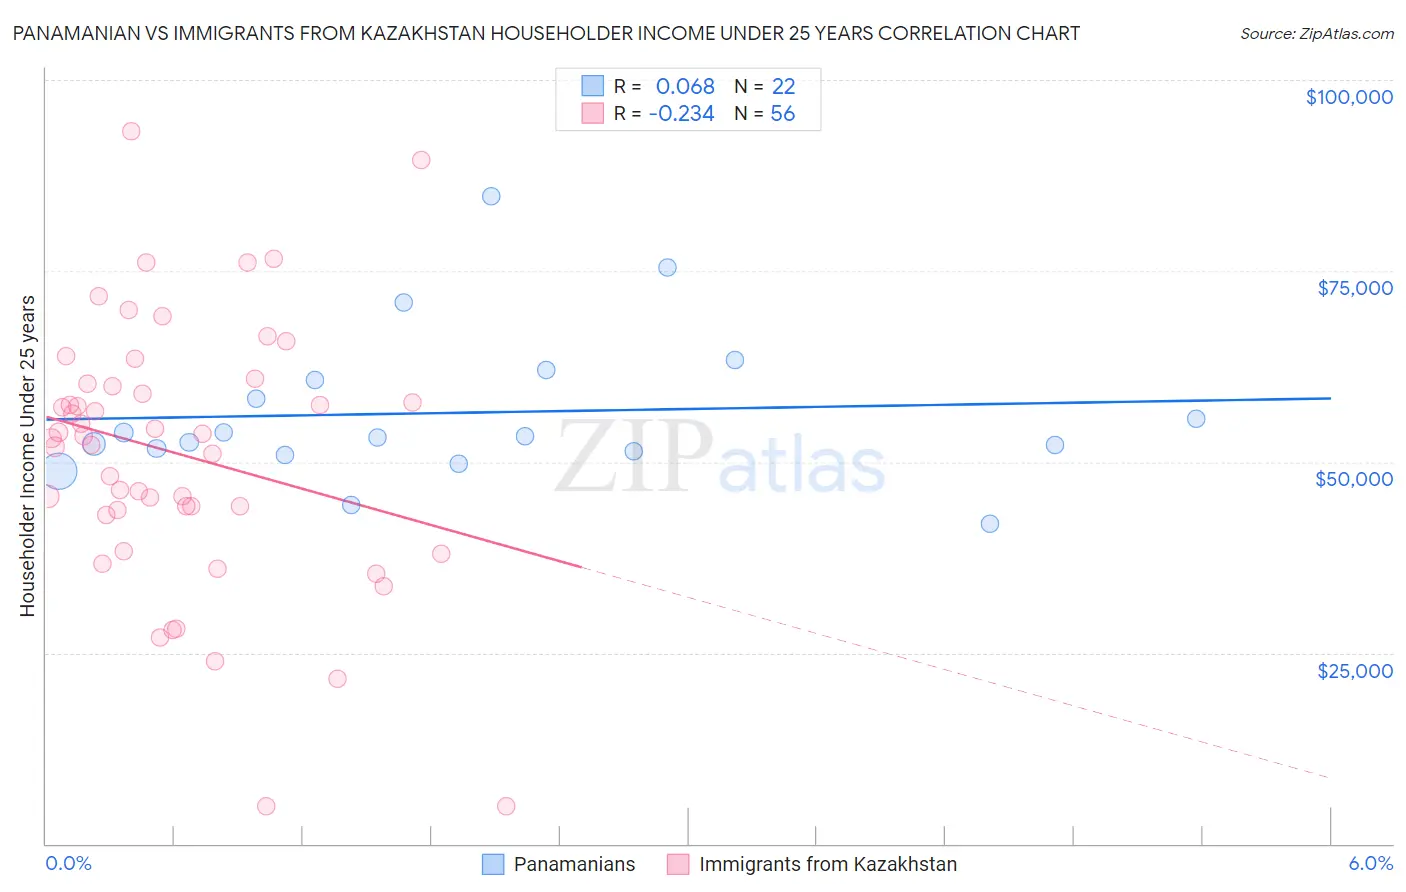 Panamanian vs Immigrants from Kazakhstan Householder Income Under 25 years